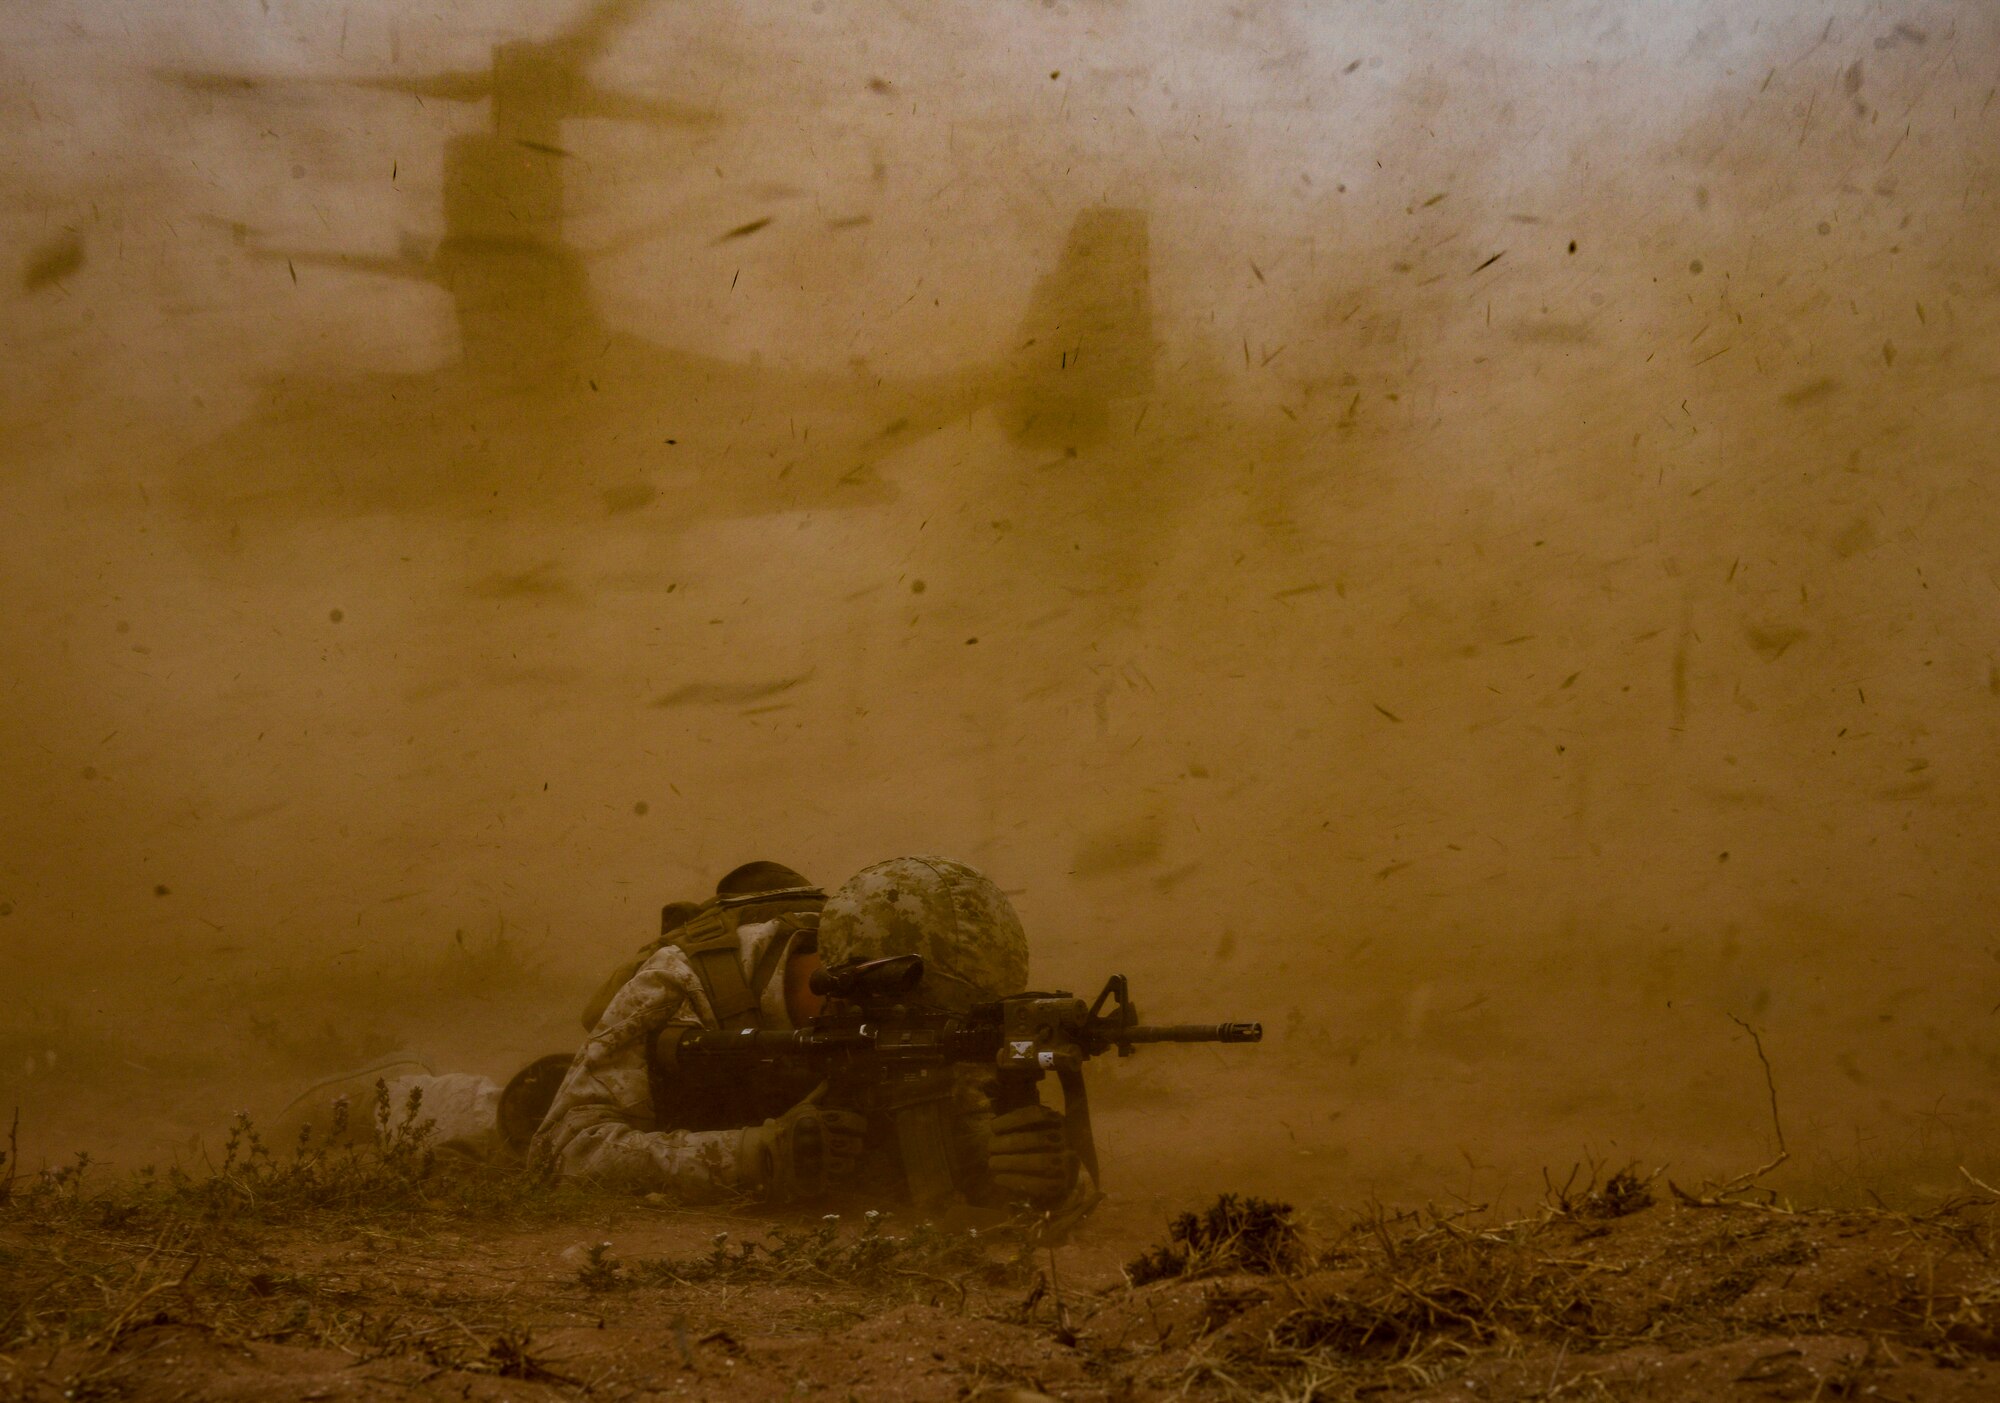 A U.S. Marine Corps Marine provides cover while an MV-22 Osprey departs during a demonstration as part of AFRICAN LION 16 at Tifnit, Kingdom of Morocco, April 26, 2016. 400 U.S. service members joined with over 350 personnel from 10 other countries to create a foundation for future partnerships and provide training to all nations on command post activities and peace support operations. (U.S. Air Force photo by Senior Airman Krystal Ardrey/Released)